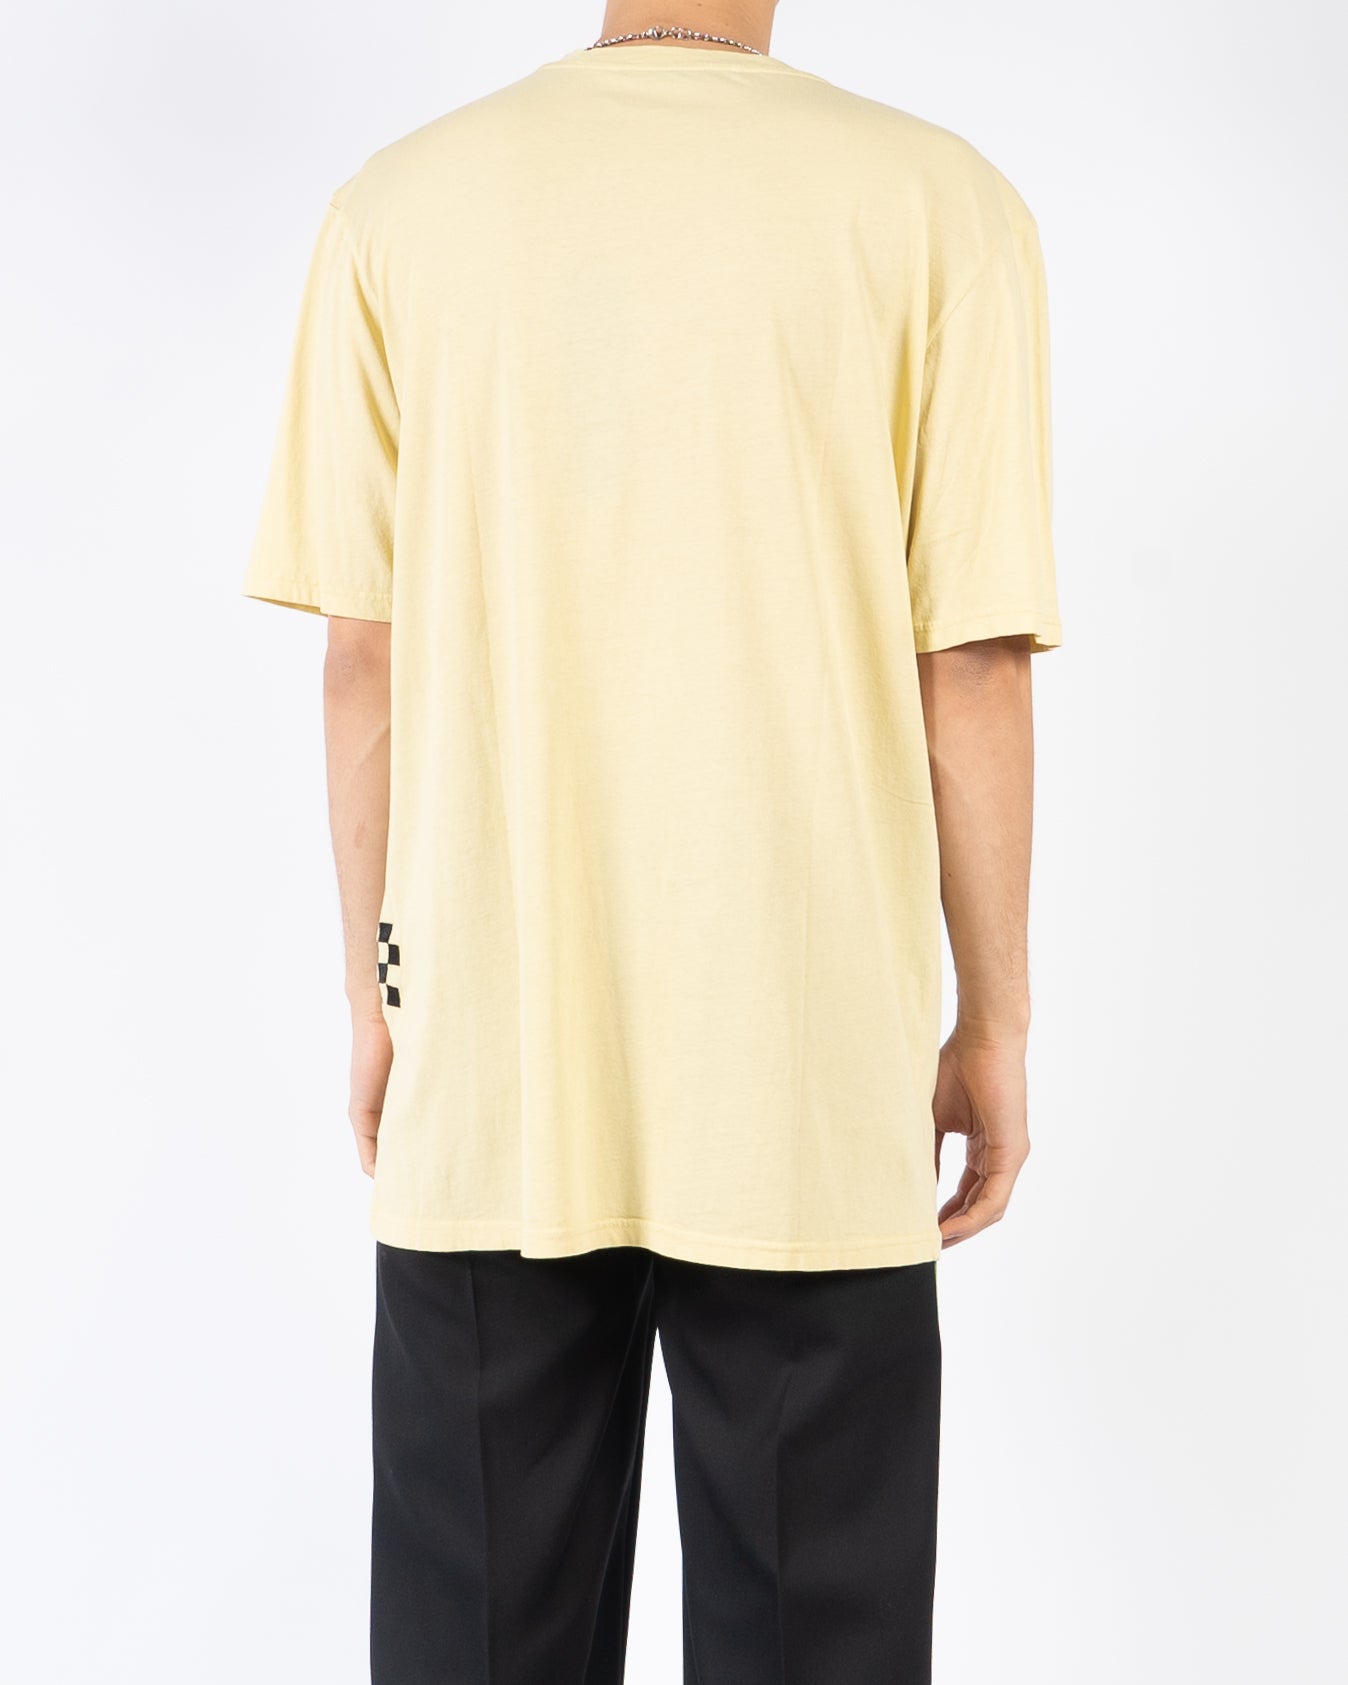 FW19 Yellow Checked Embroidered T-Shirt